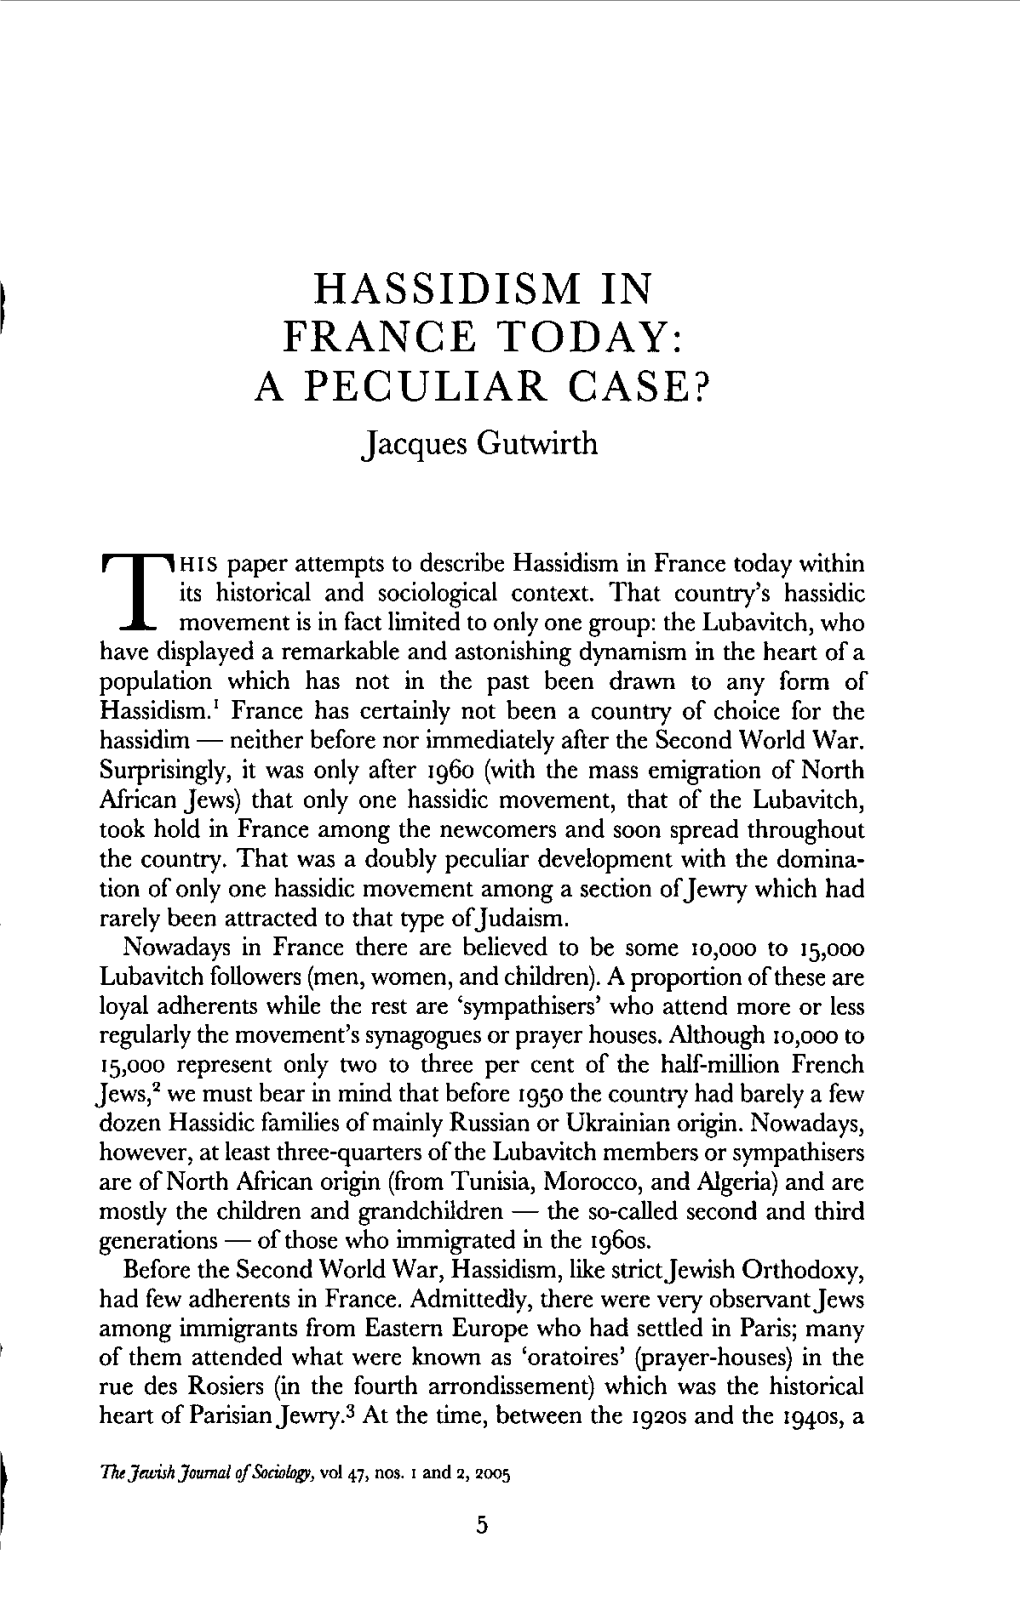 HASSIDISM in FRANCE TODAY: a PECULIAR CASE? Jacques Gutwirth